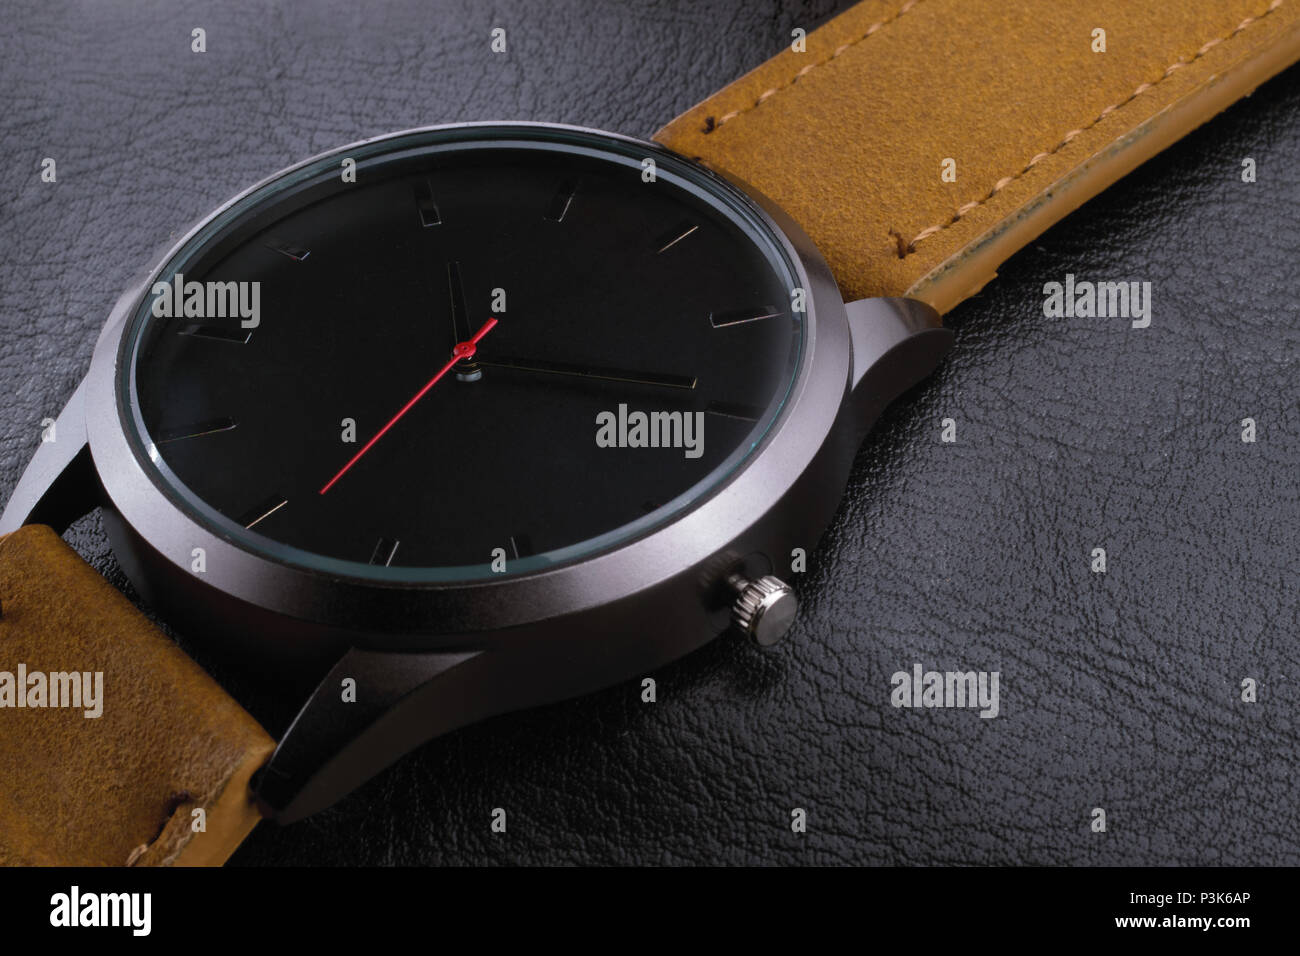 Black wrist watch with red pointer closeup macro, product shot, with leather straps and background Stock Photo